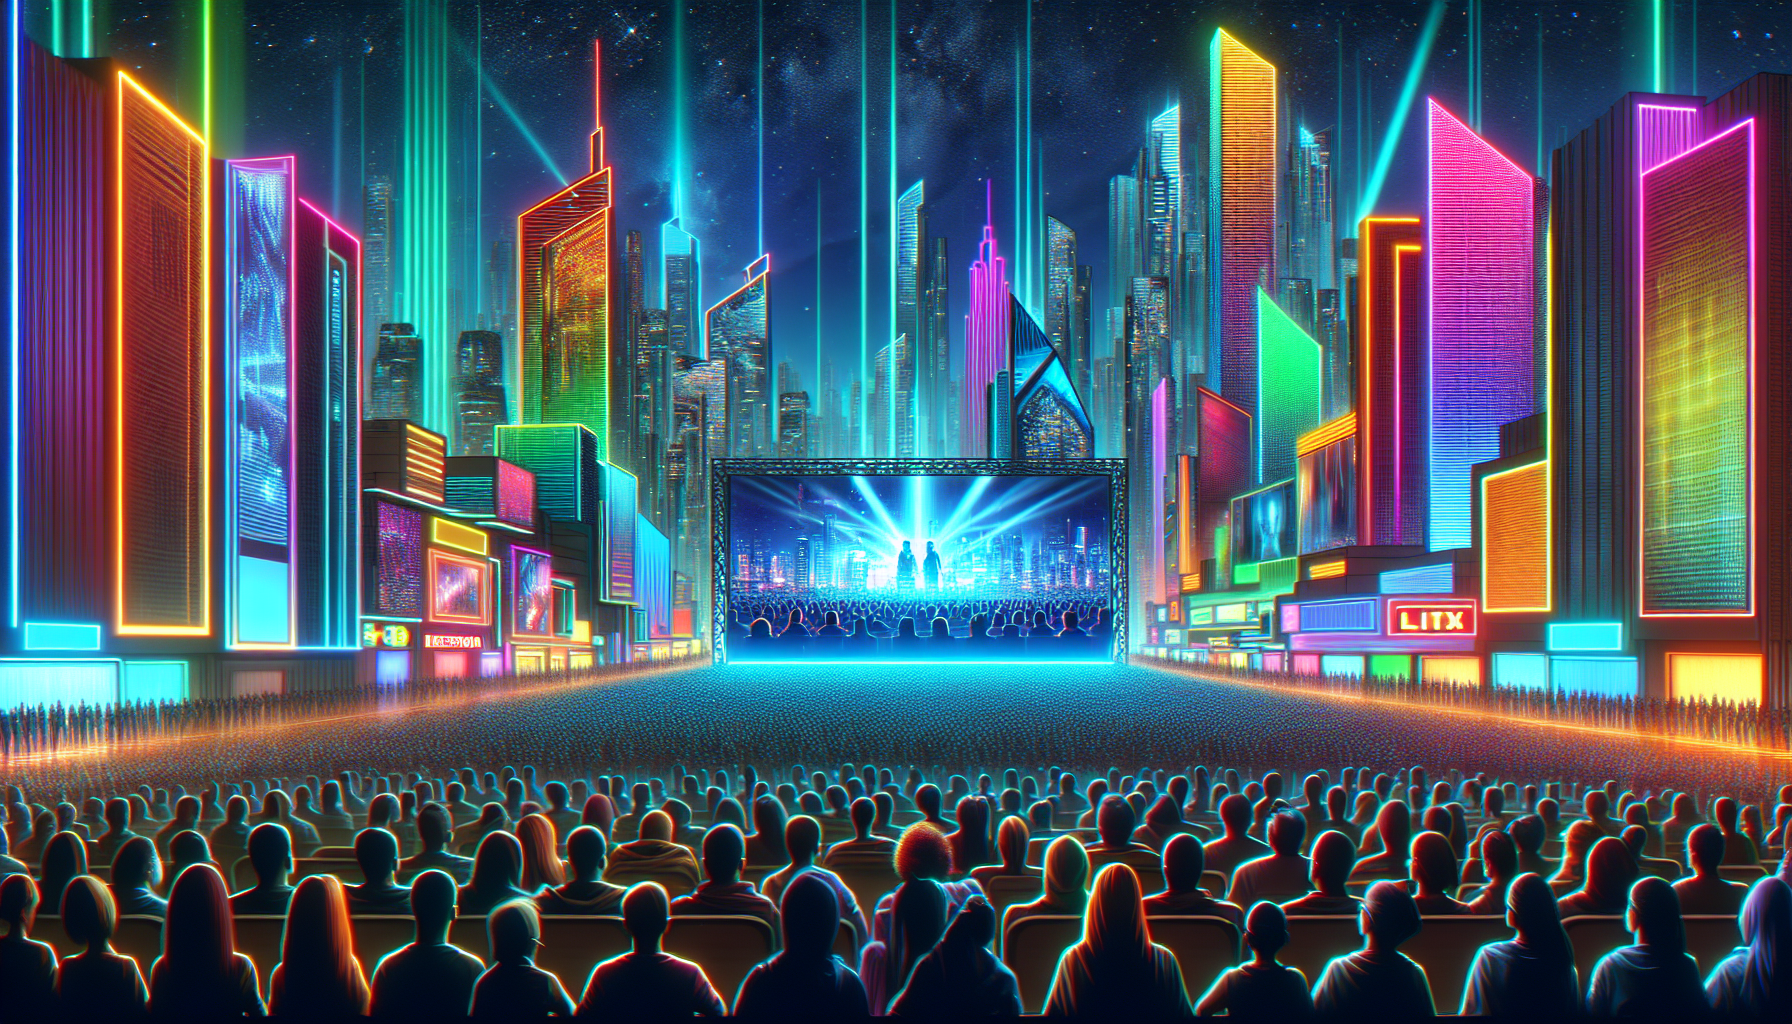 A futuristic cityscape at night, illuminated by neon lights, with holograms projecting from skyscrapers and a crowd watching an open-air cinema screen showing a montage of iconic dystopian films.